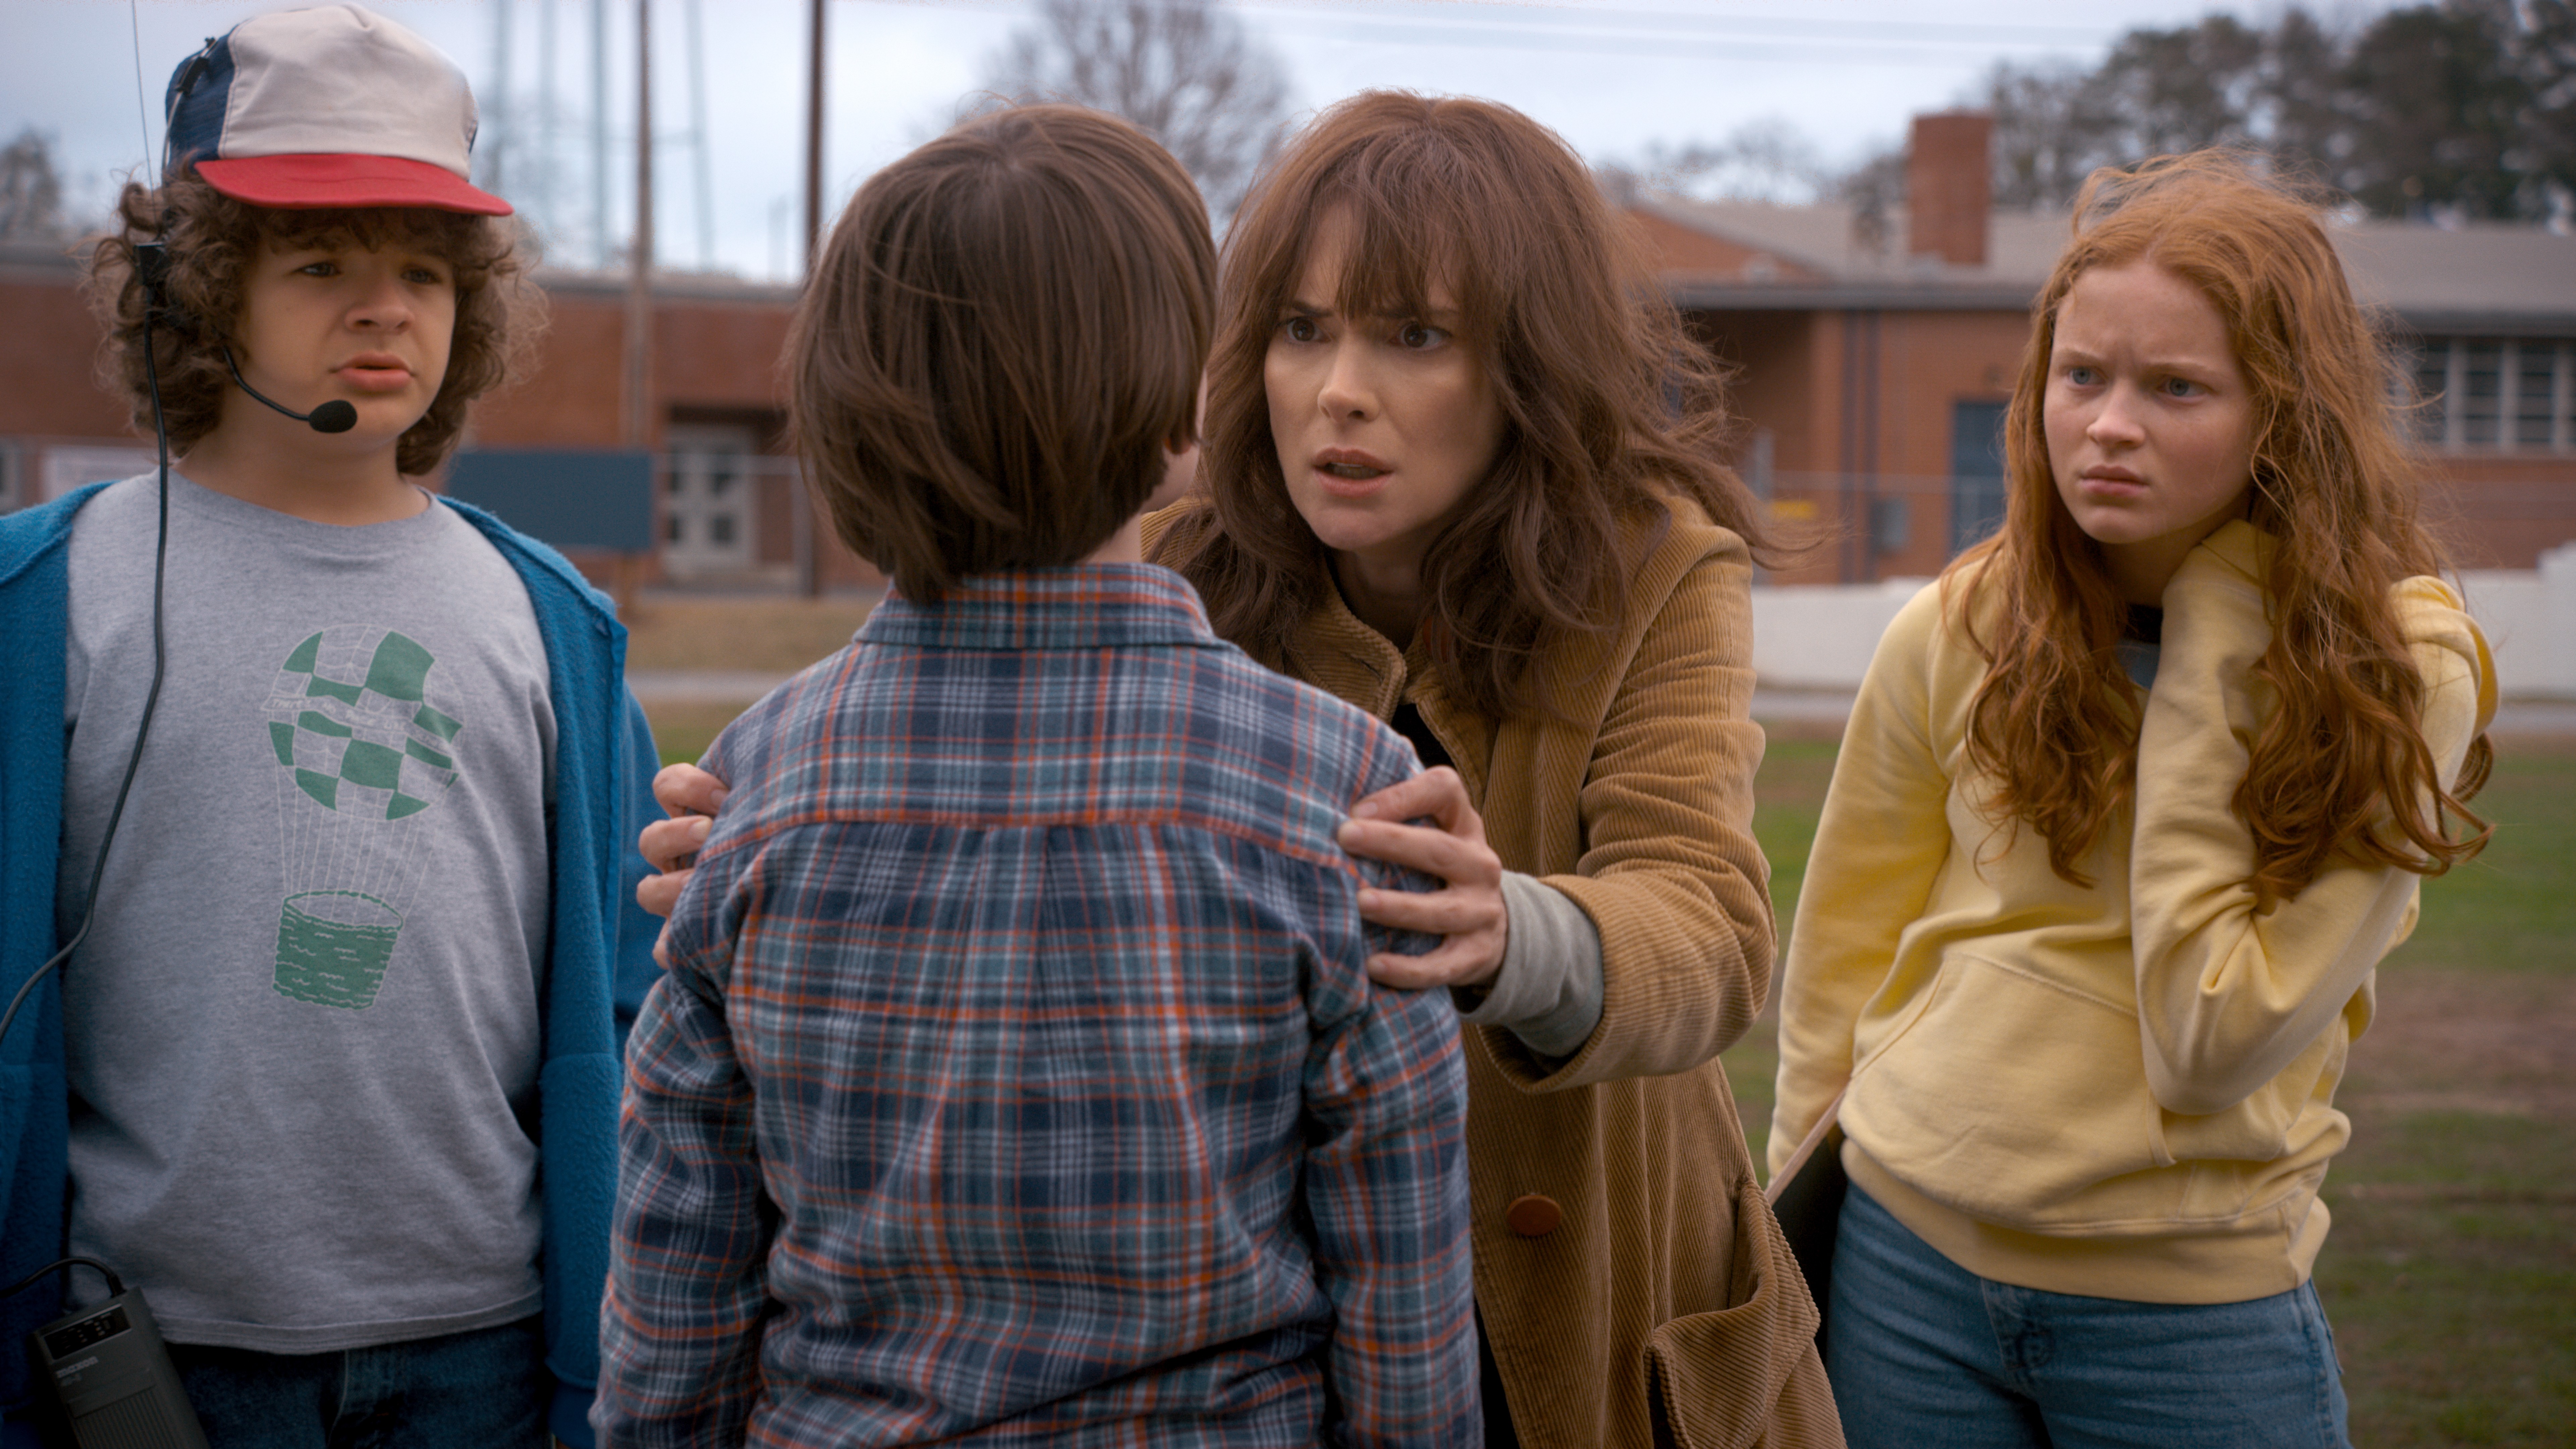 Heres How You Can Read And Download The Stranger Things Season 2  Dialogue Scripts And Transcripts